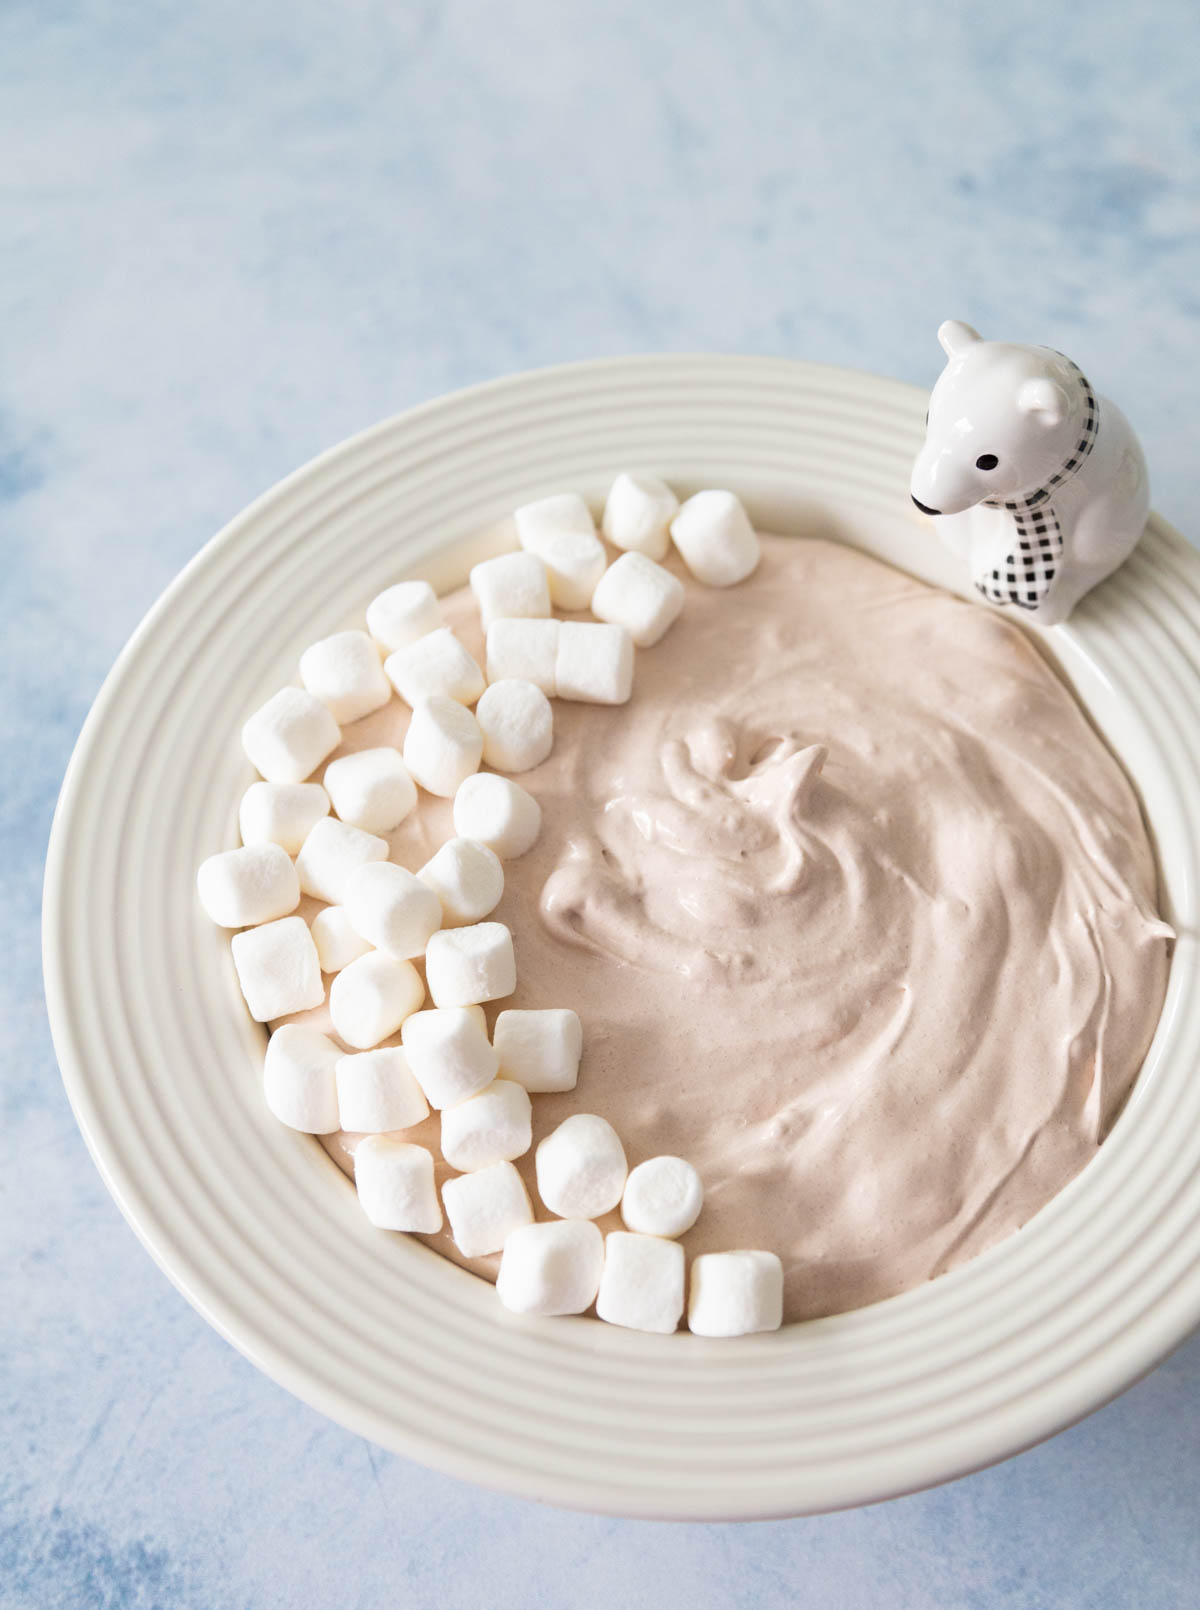 The dip has only been garnished with marshmallows on top.